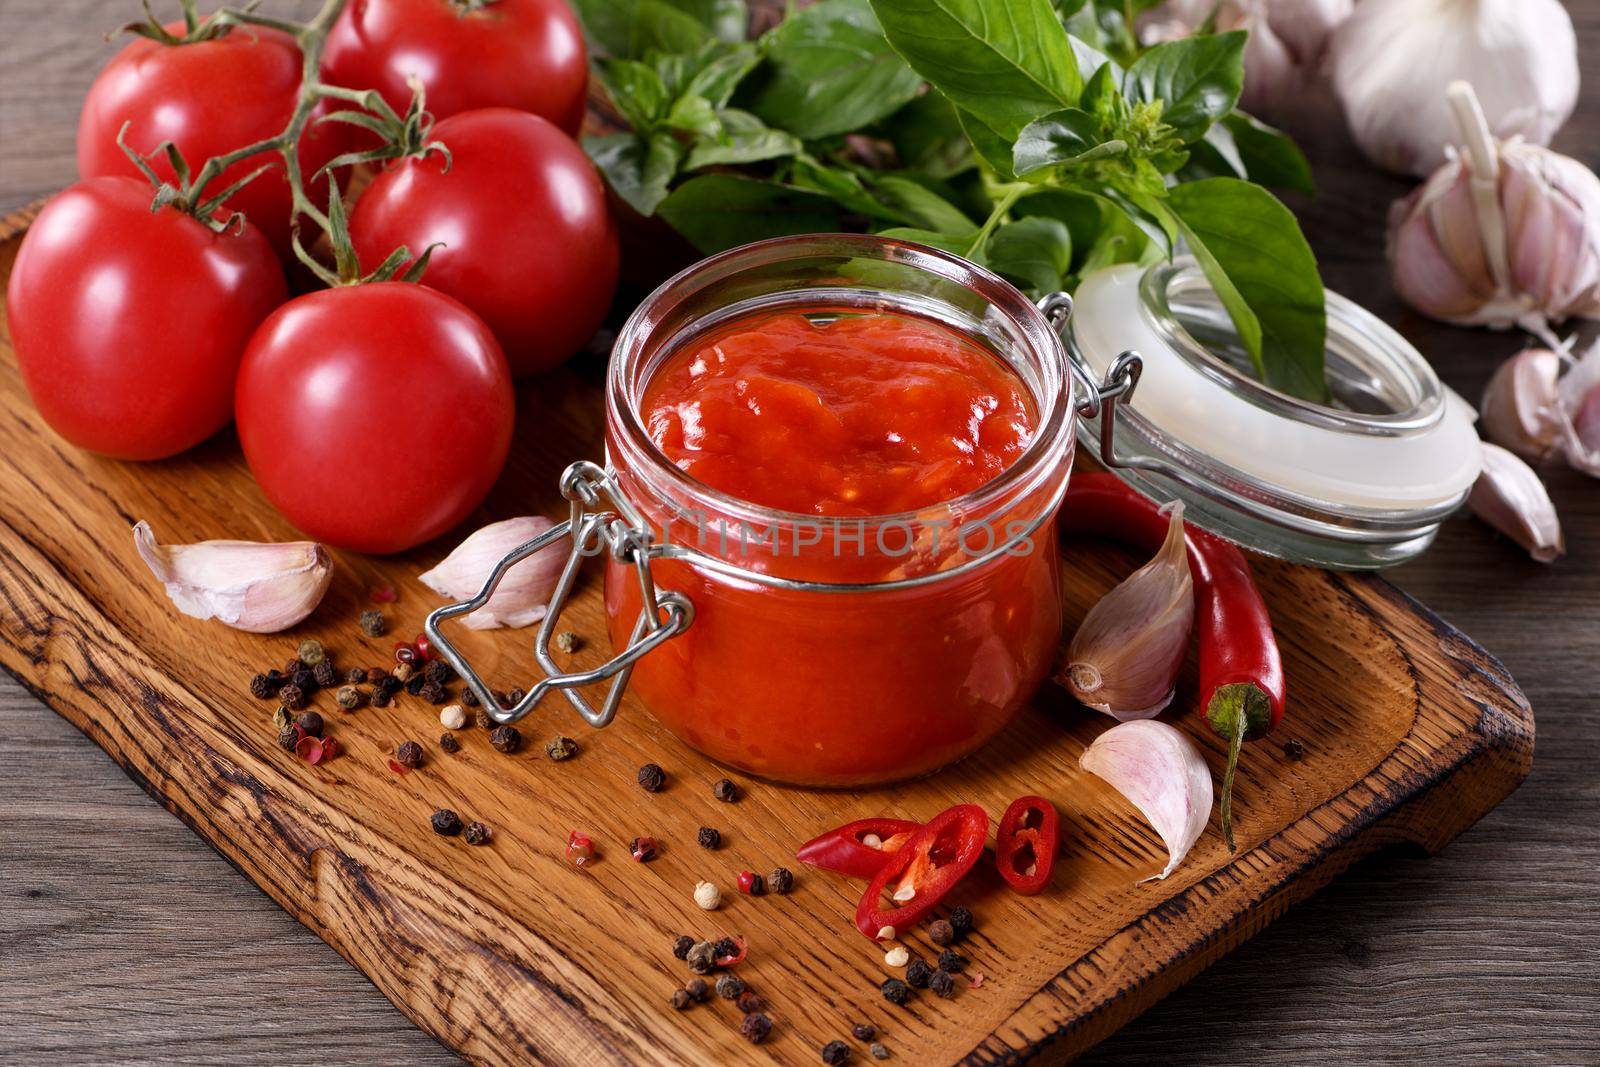 Traditional classic tomato sauce with spices and herbs. Fragrant dressing for various dishes. Taste and simplicity.